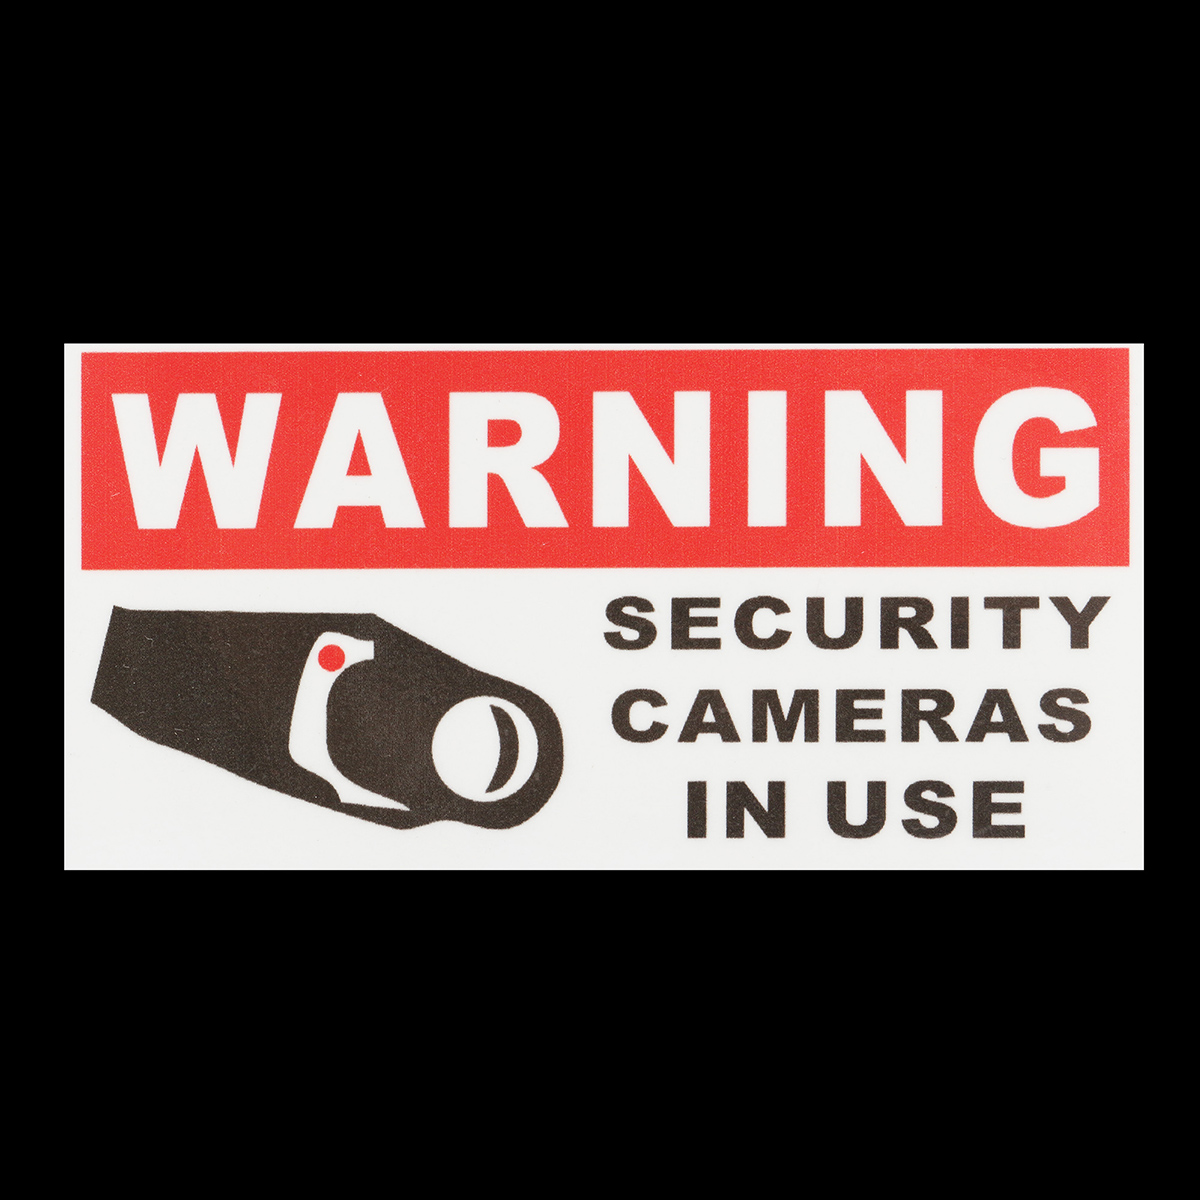 8Pcs-Security-Camera-In-Use-Self-adhensive-Stickers-Safety-Signs-Decal-Waterproof-1094020-2